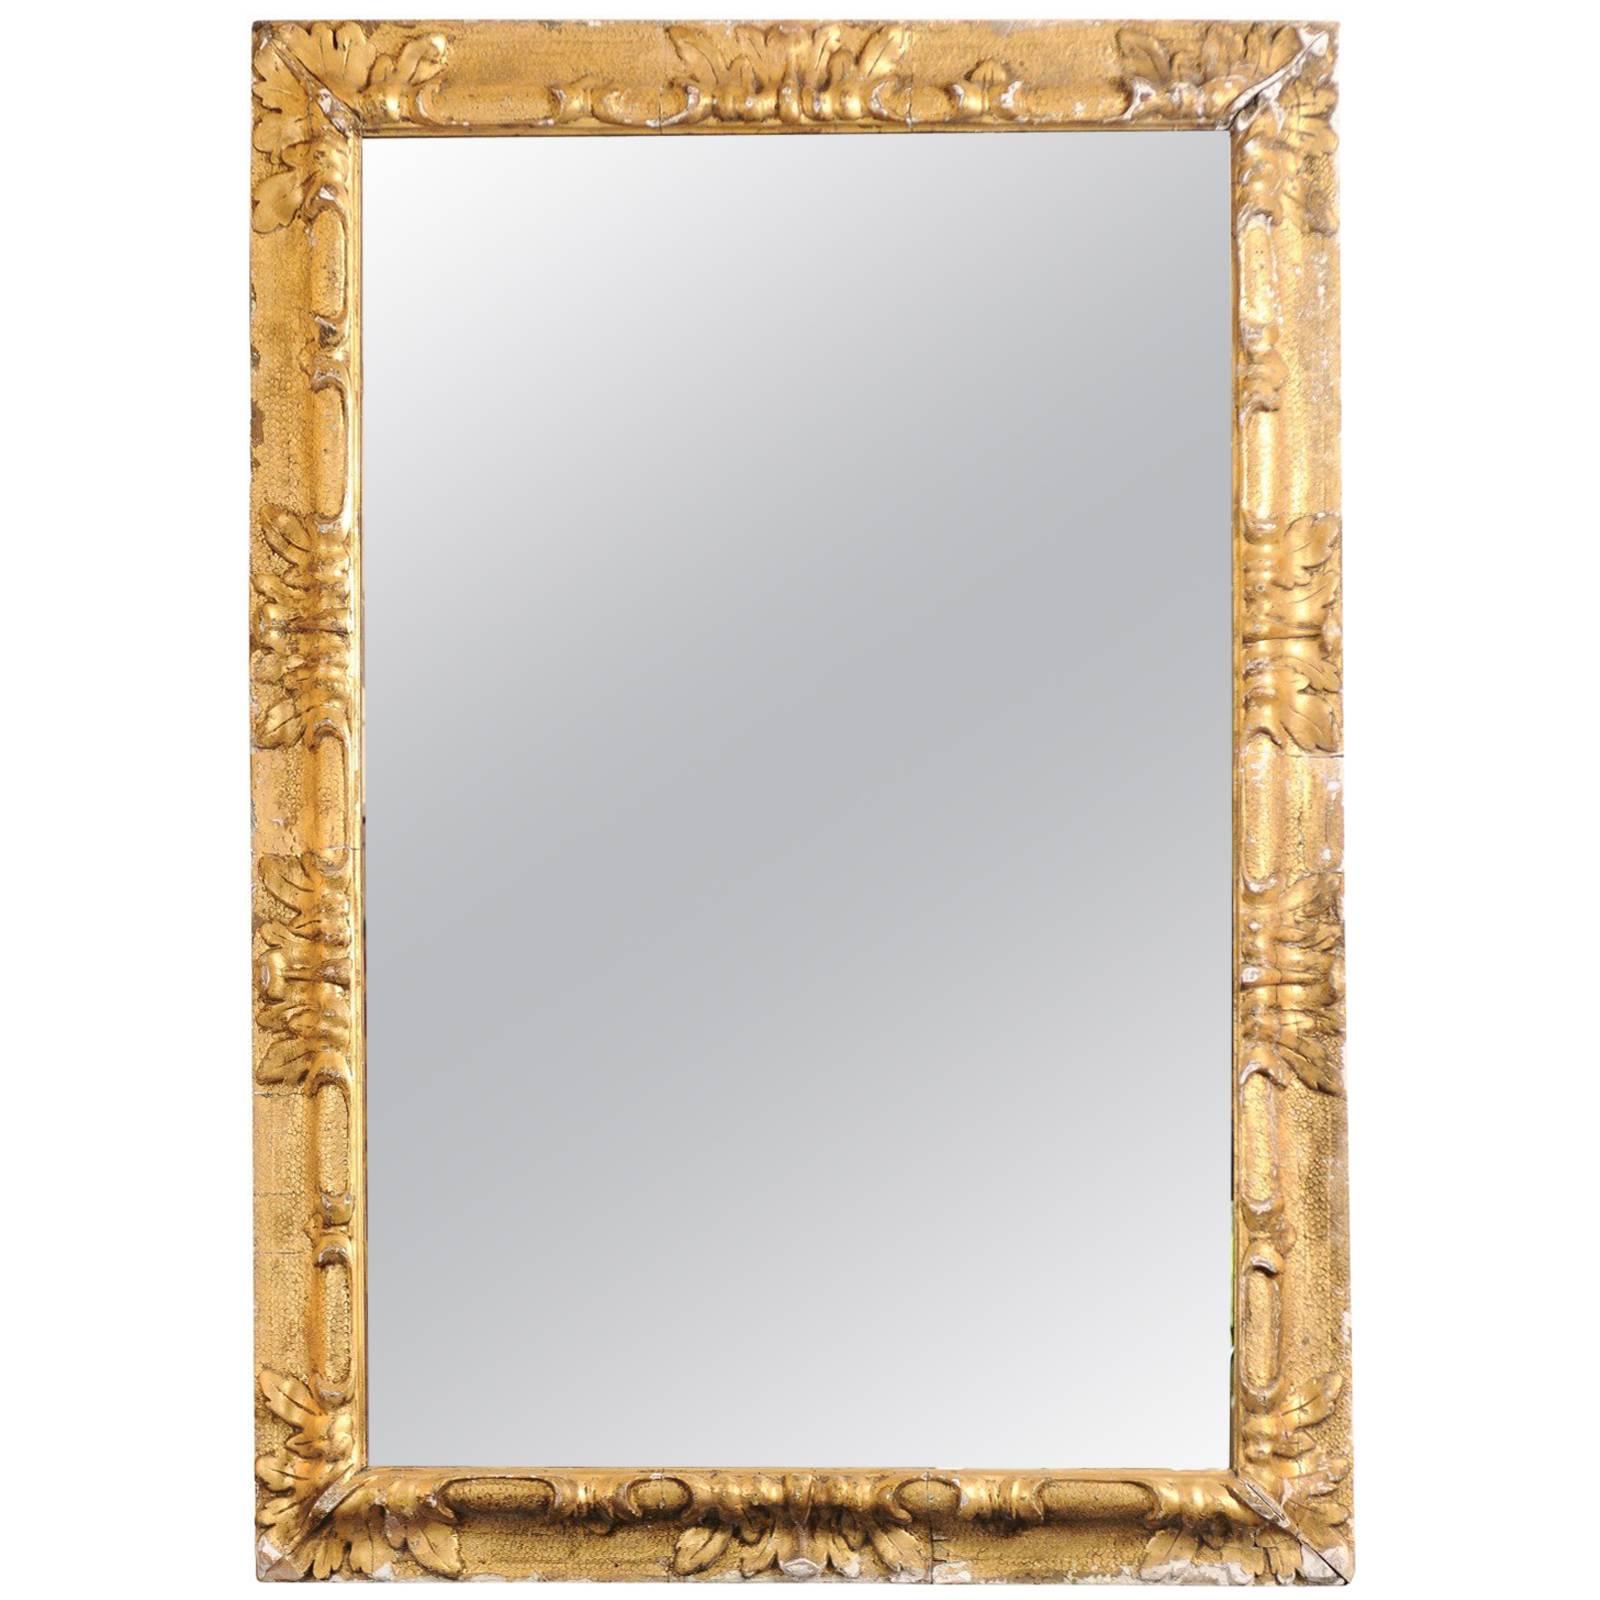 19th Century Italian Giltwood Frame with Acanthus Leaf Detail and New Mirror